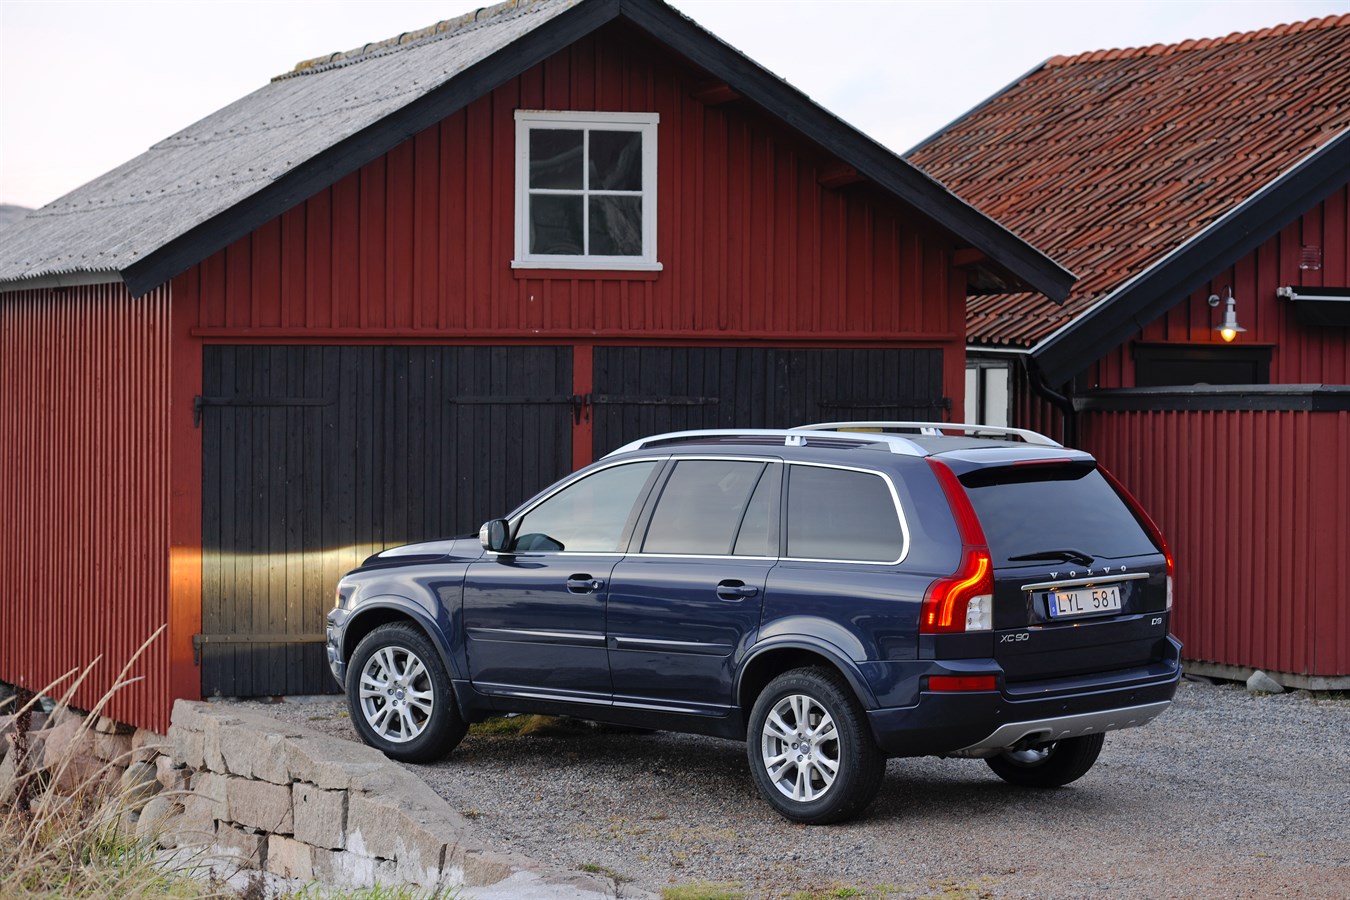 Volvo XC90 - Sweden's most valuable export product